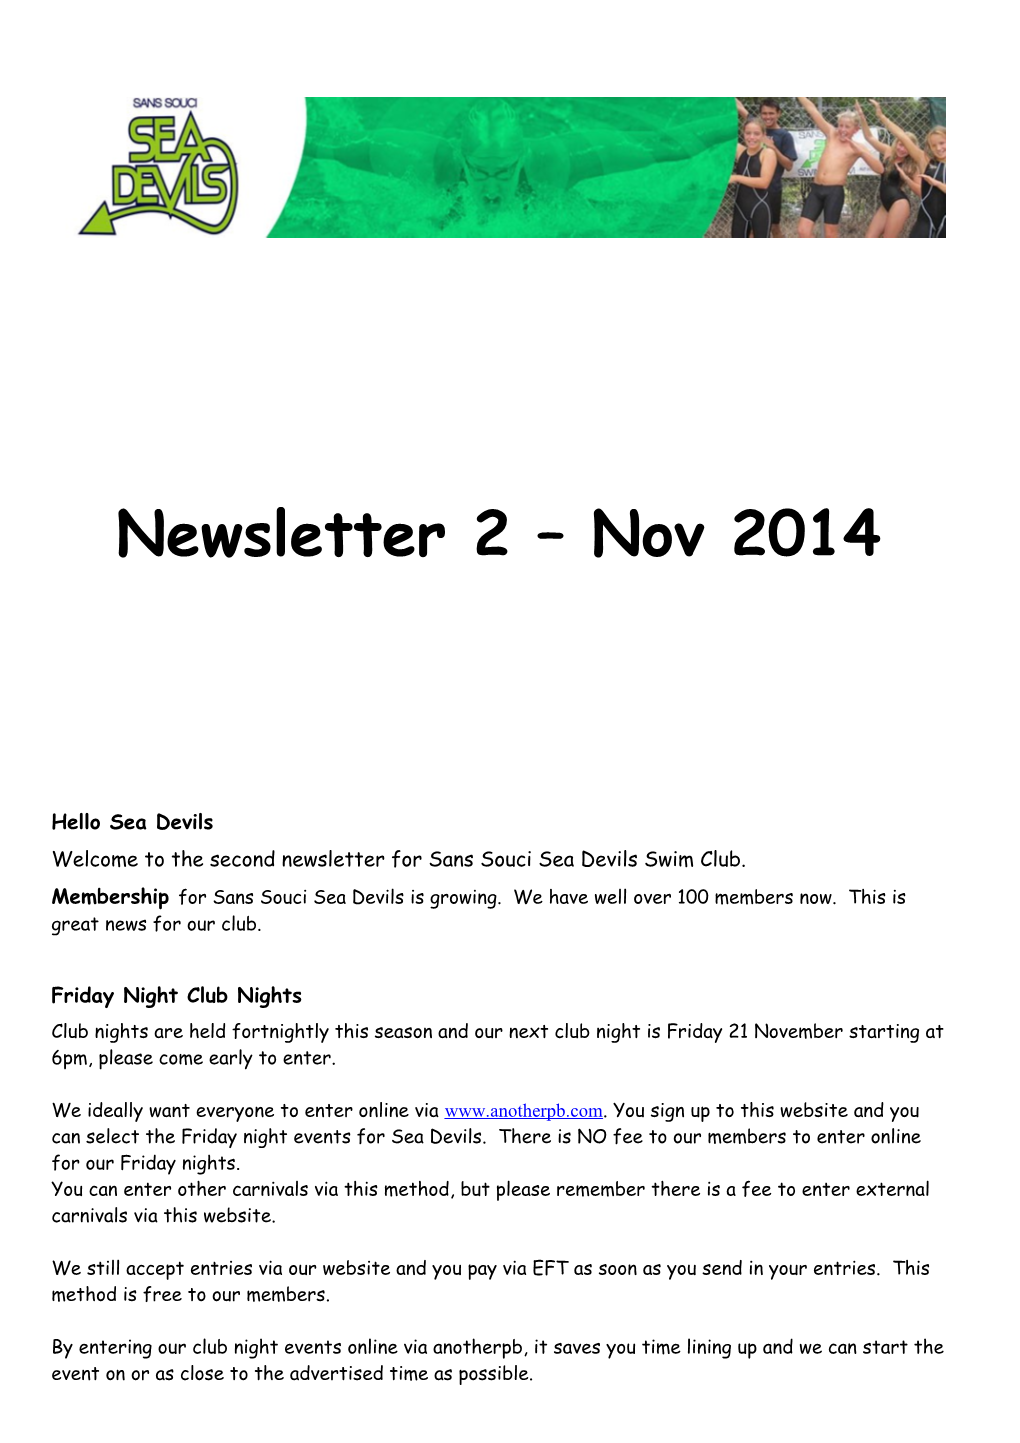 Welcome to the Second Newsletter for Sans Souci Sea Devils Swim Club